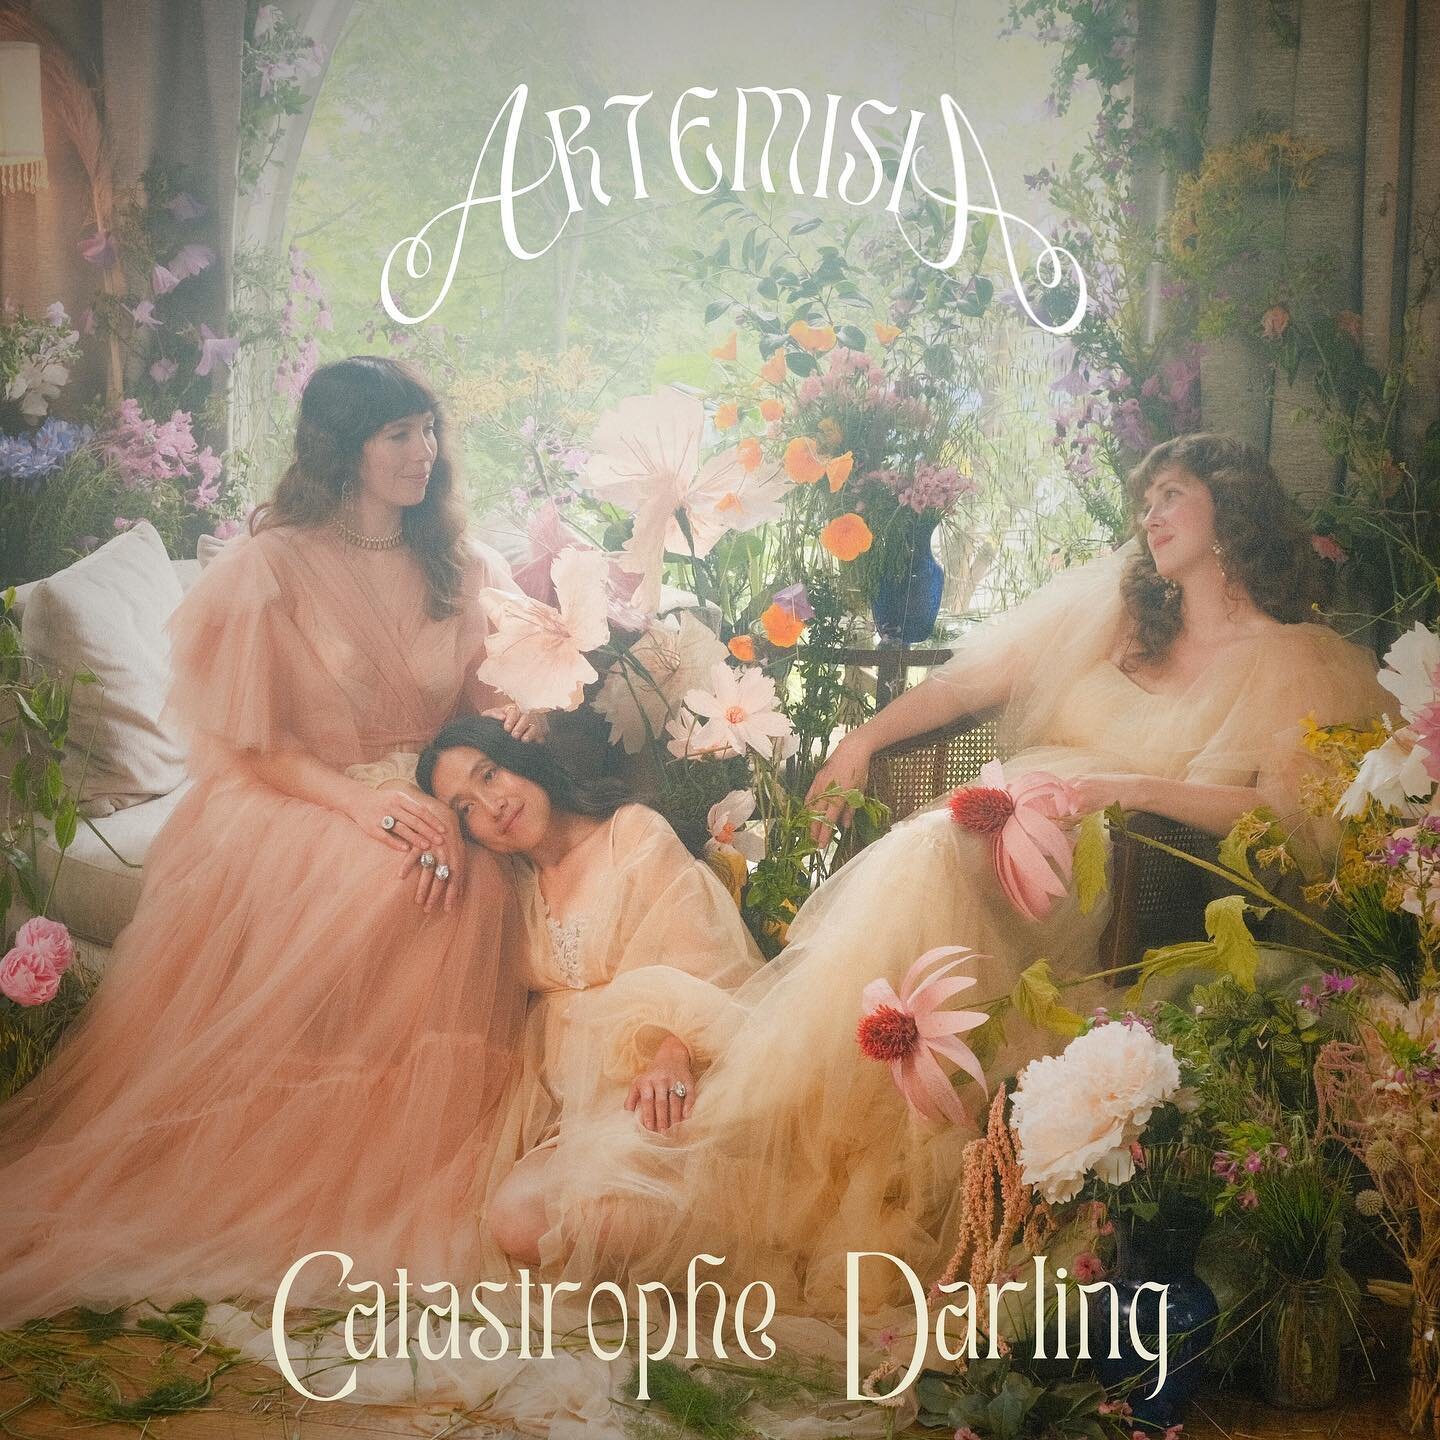 catastrophe darling is out now, everywhere

it&rsquo;s a dream come true to give these songs over to you. listen when you&rsquo;re lonely, when you&rsquo;re longing, when you&rsquo;re free.

🌞today is bandcamp friday! it&rsquo;s a great day to buy t